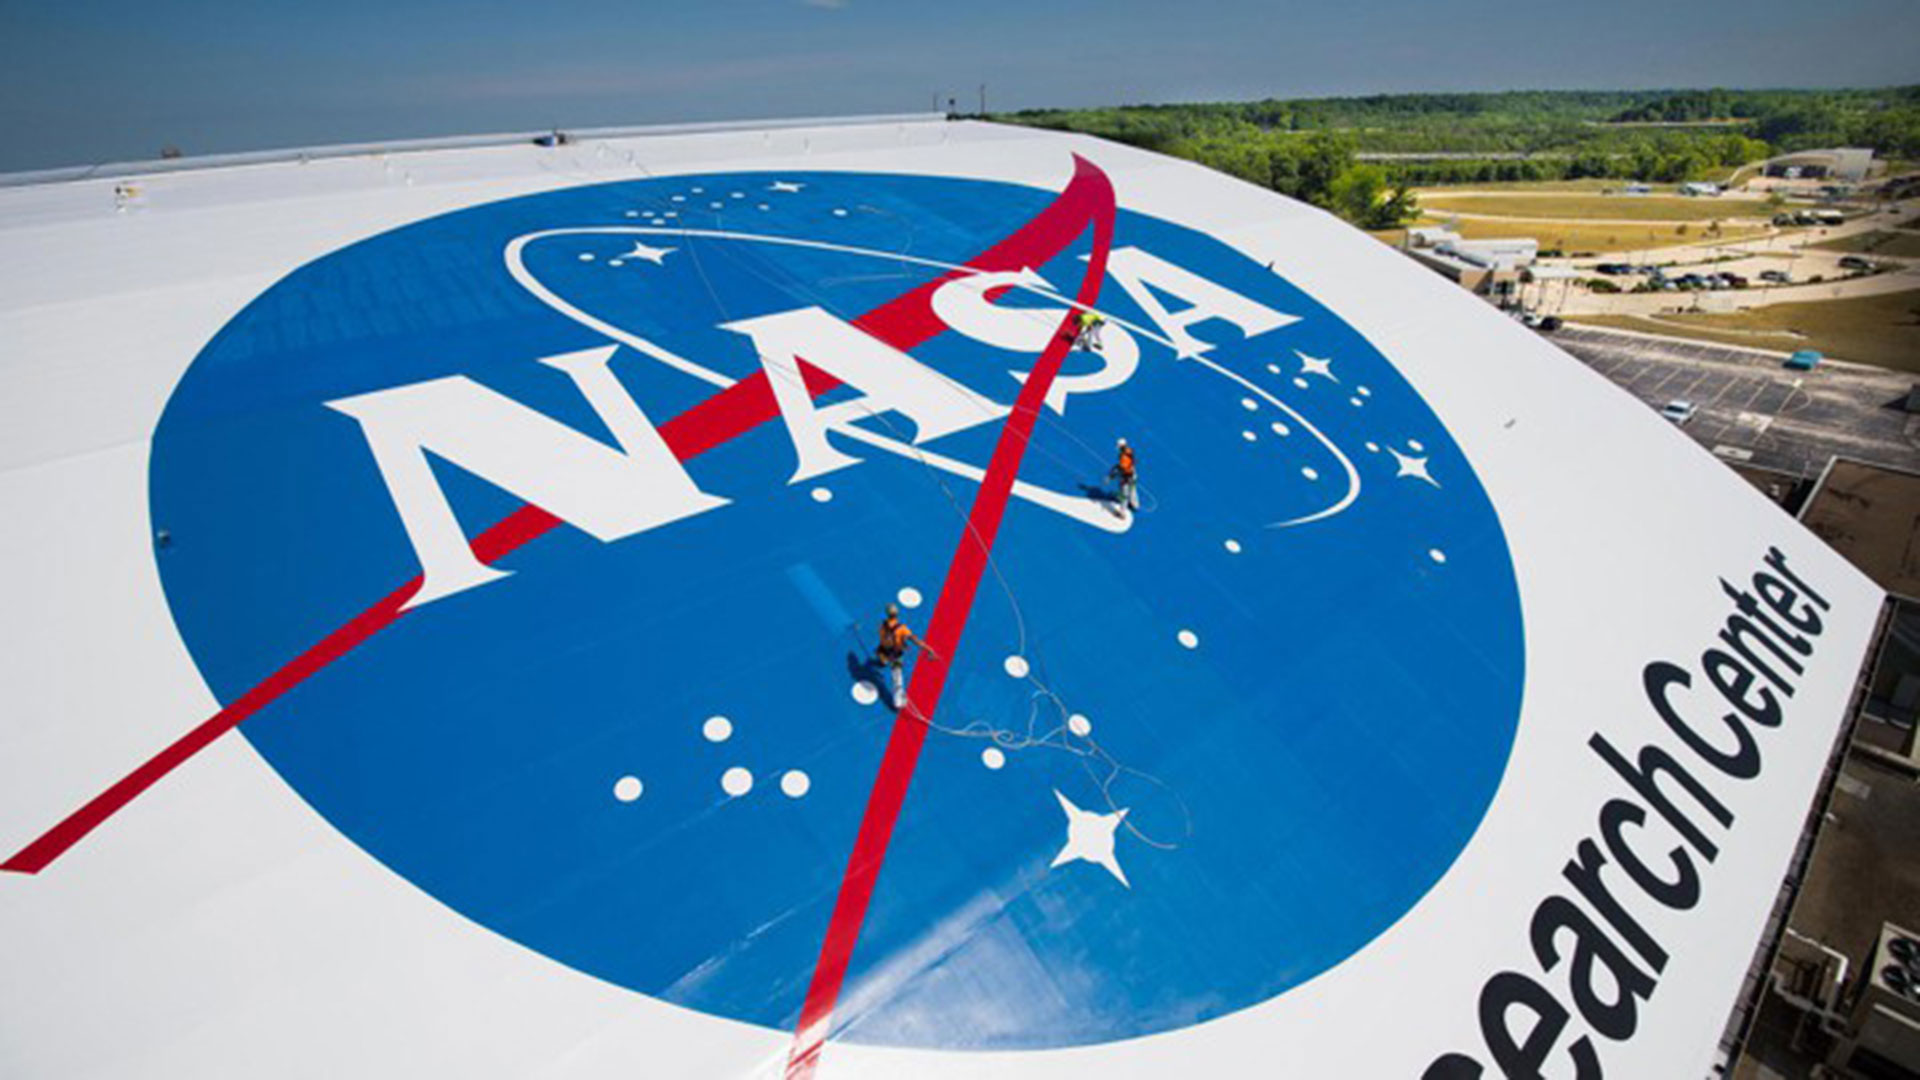 NASA invests in development of advanced aviation materials